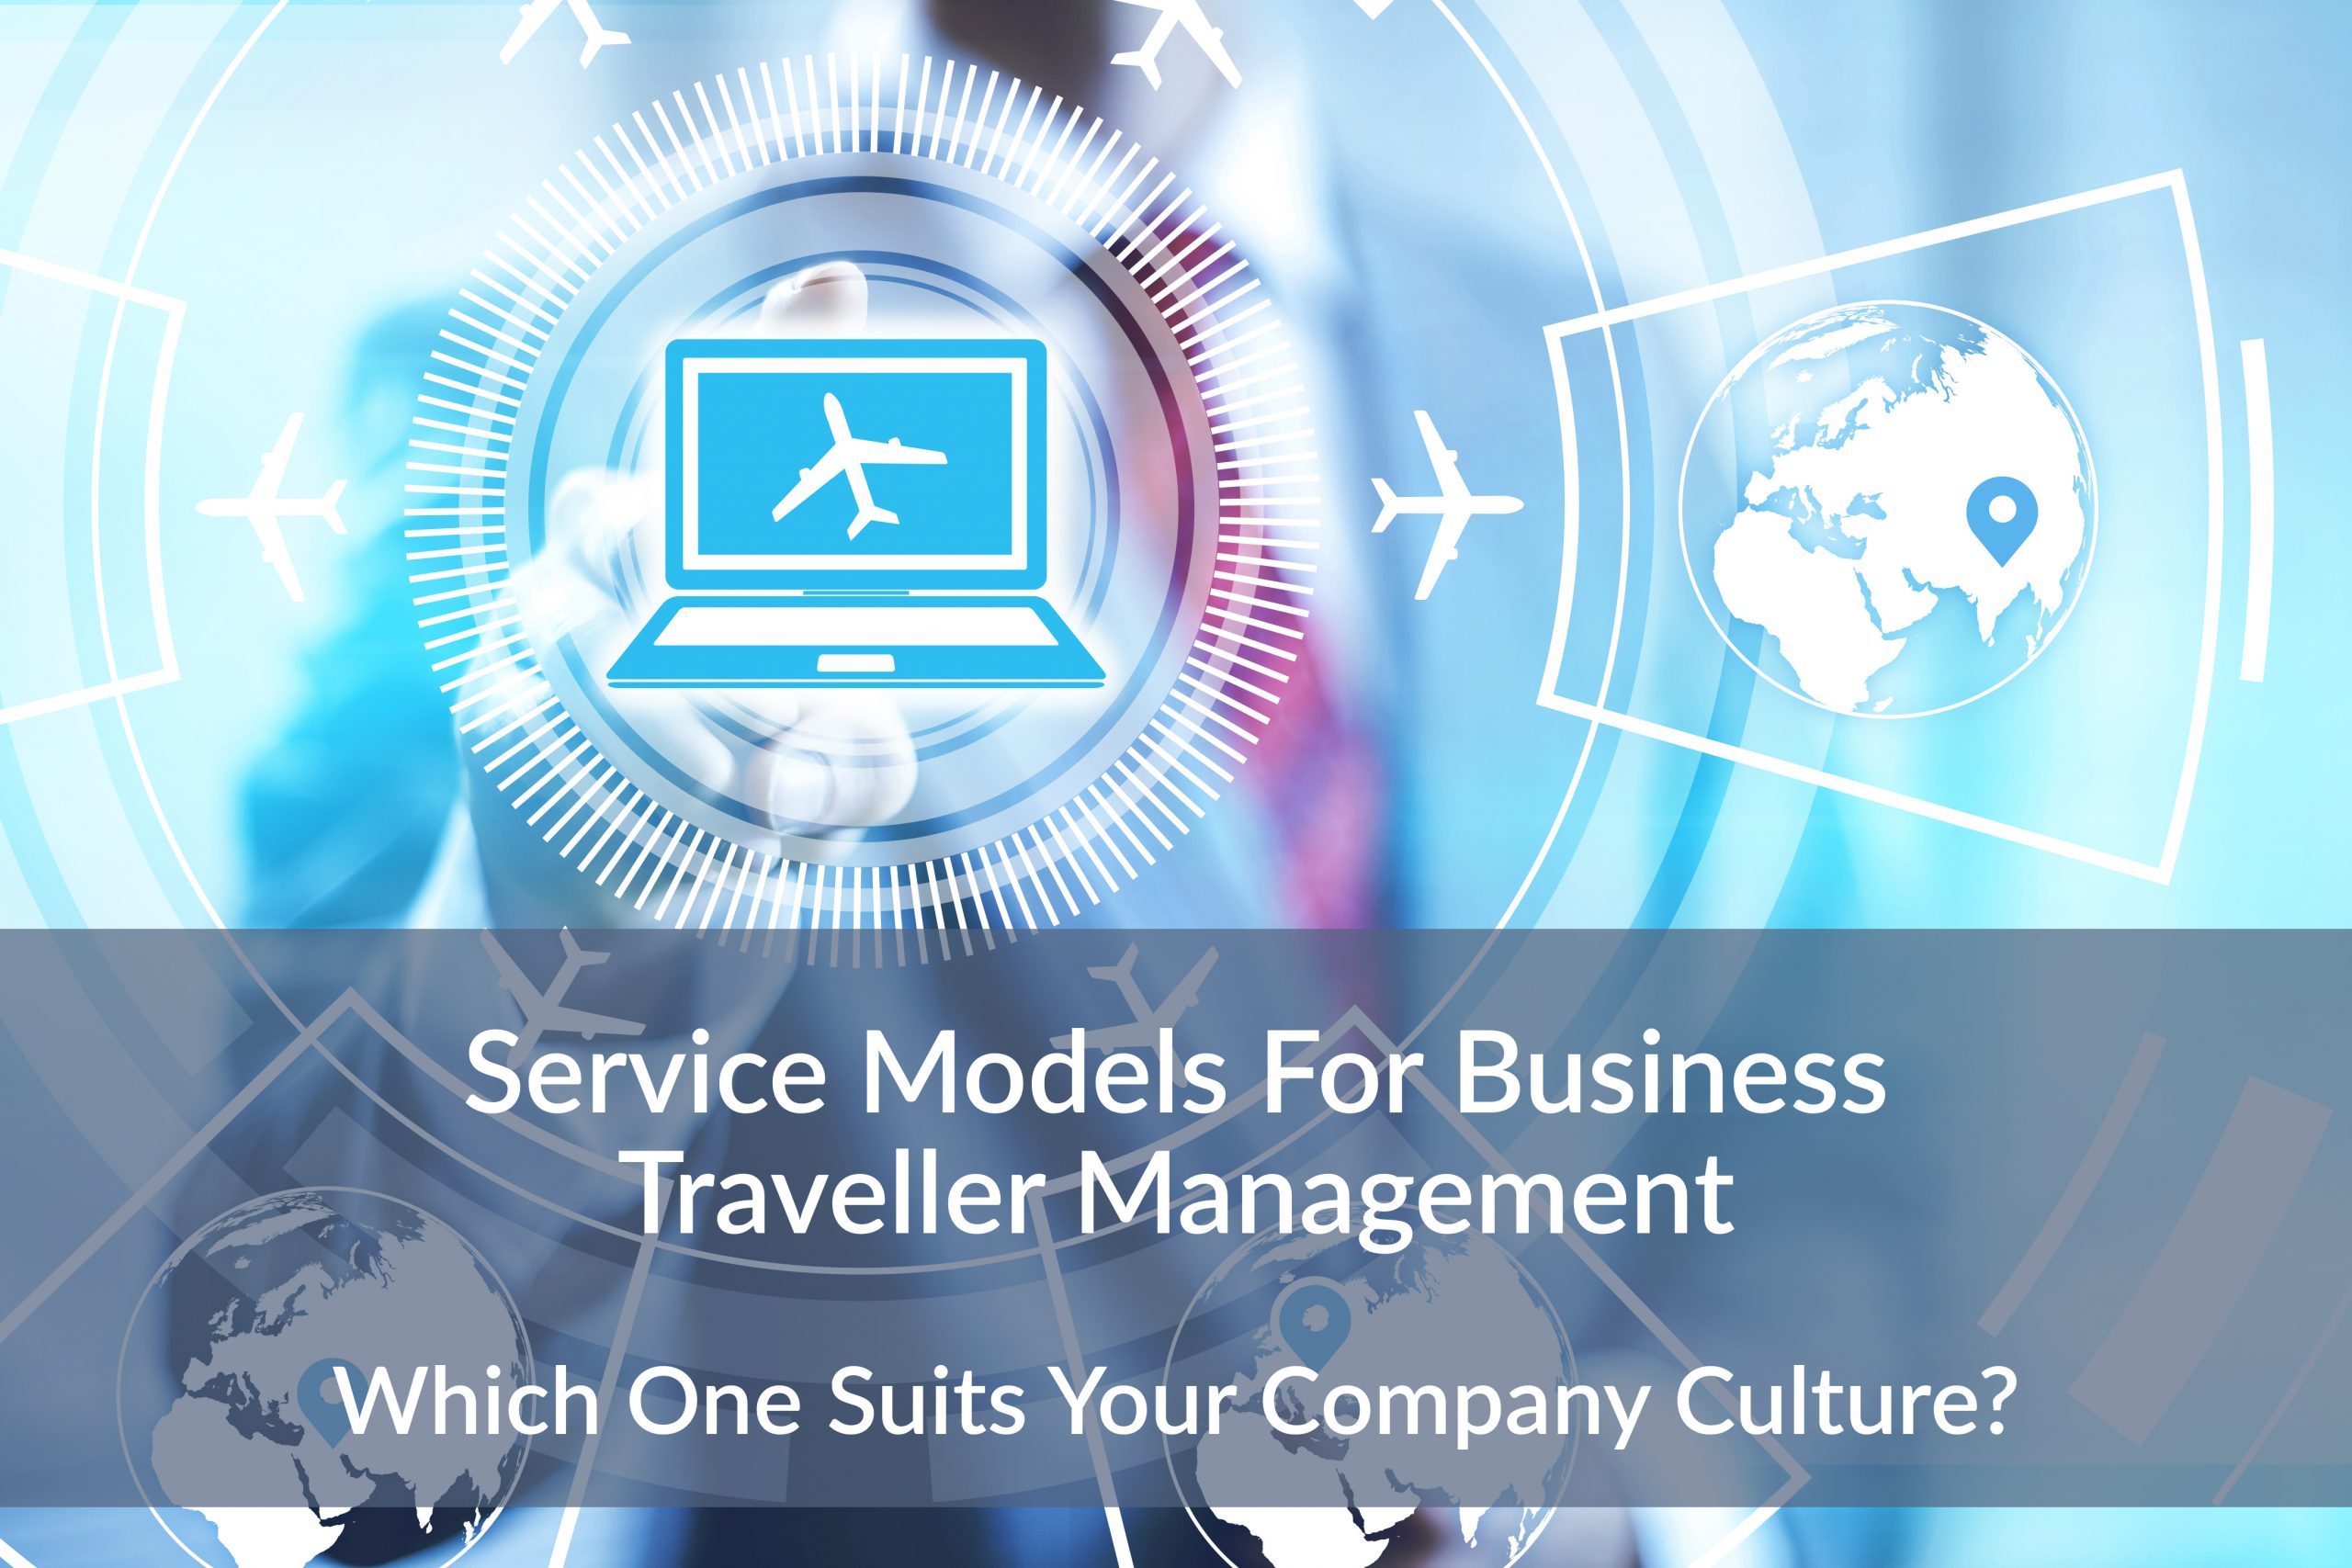 business traveller meaning in english